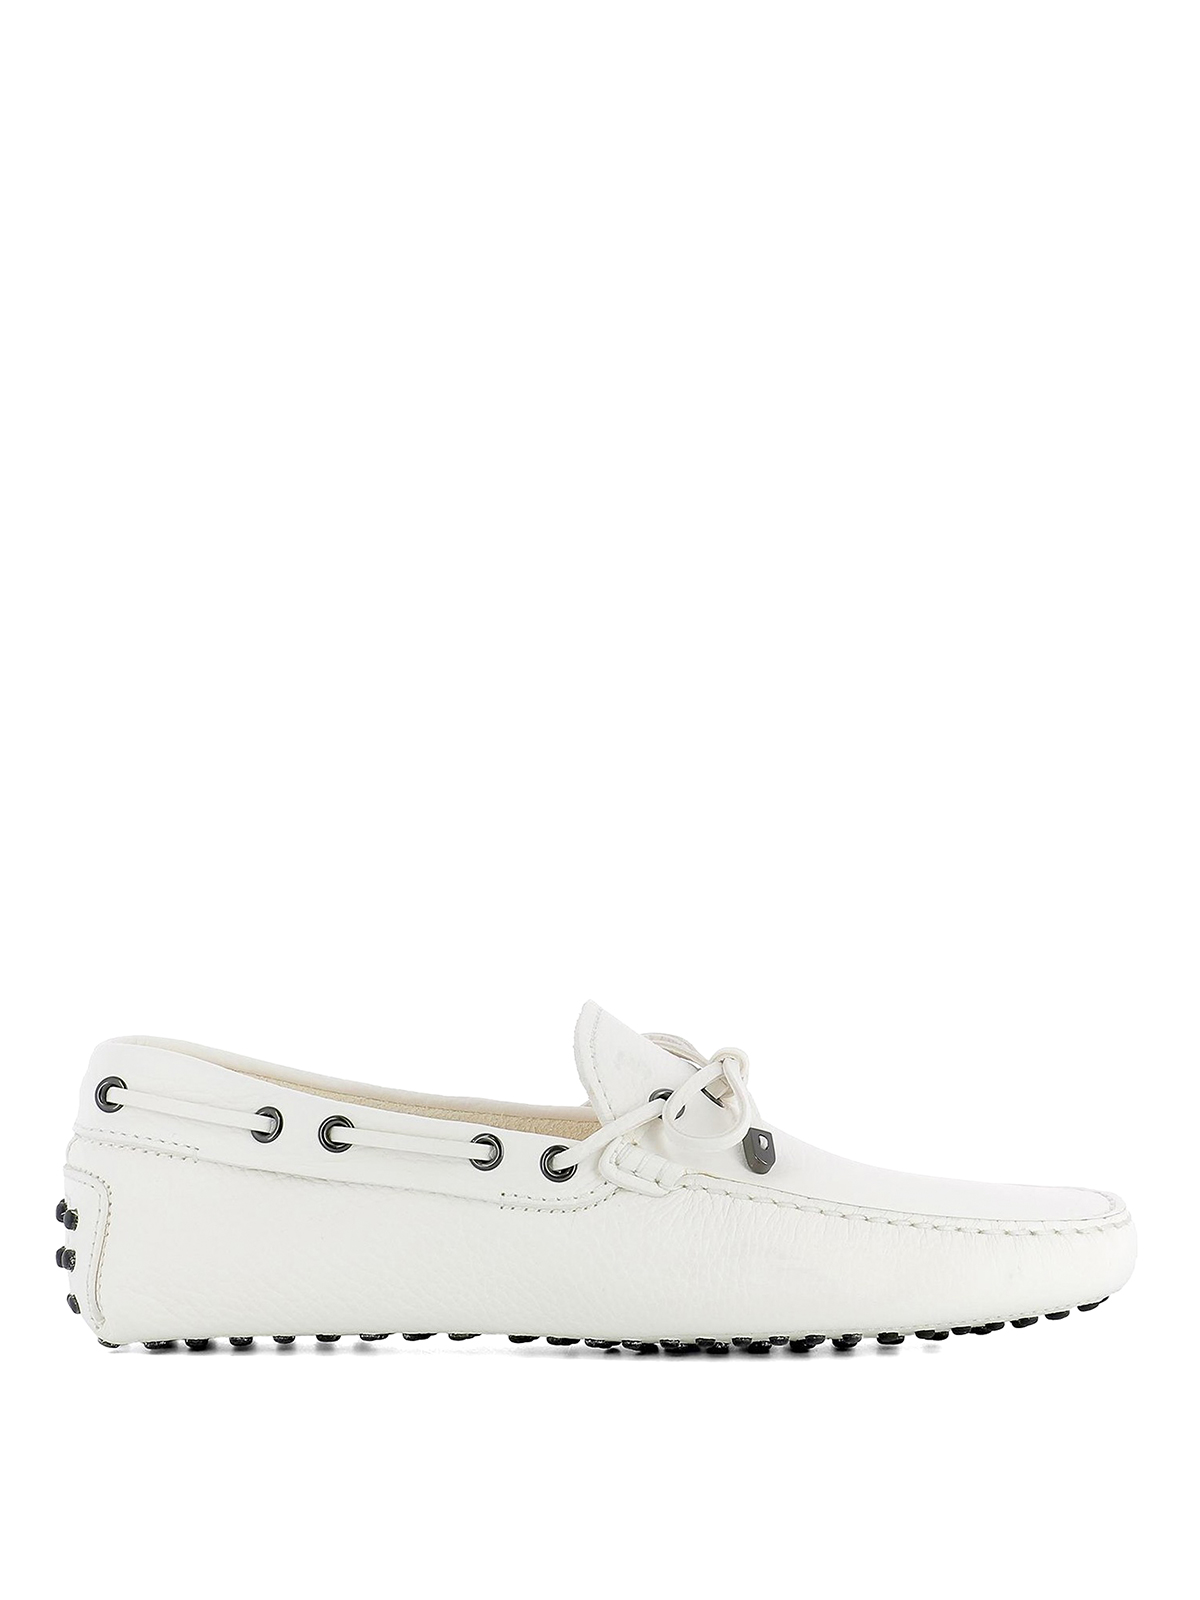 tod's white loafers